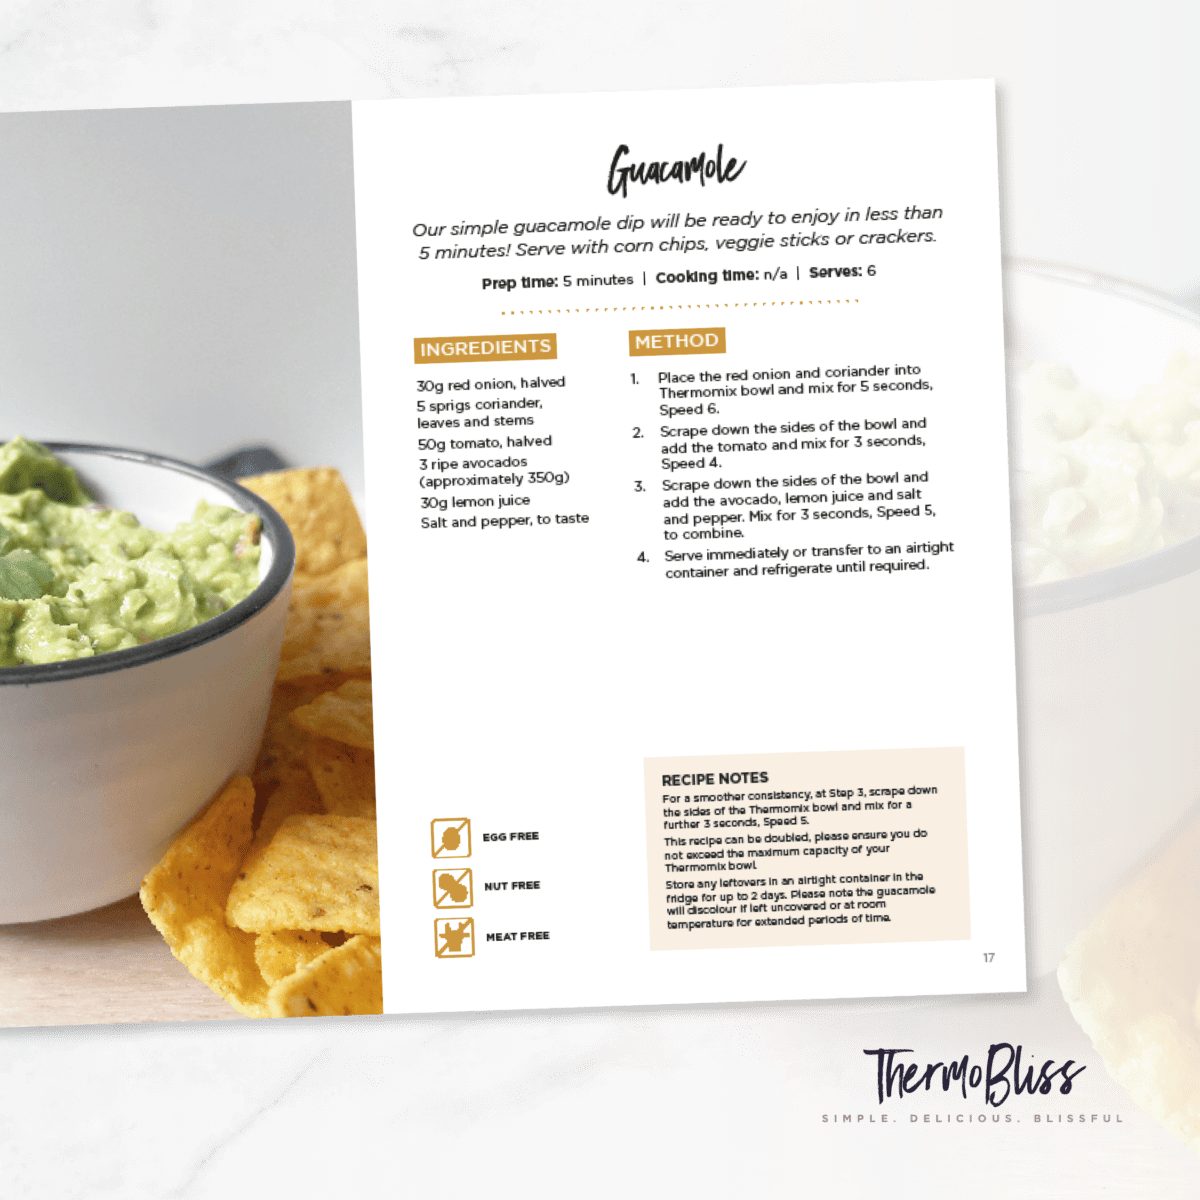 Image of Guacamole recipe from the Thermomix Entertaining Cookbook.